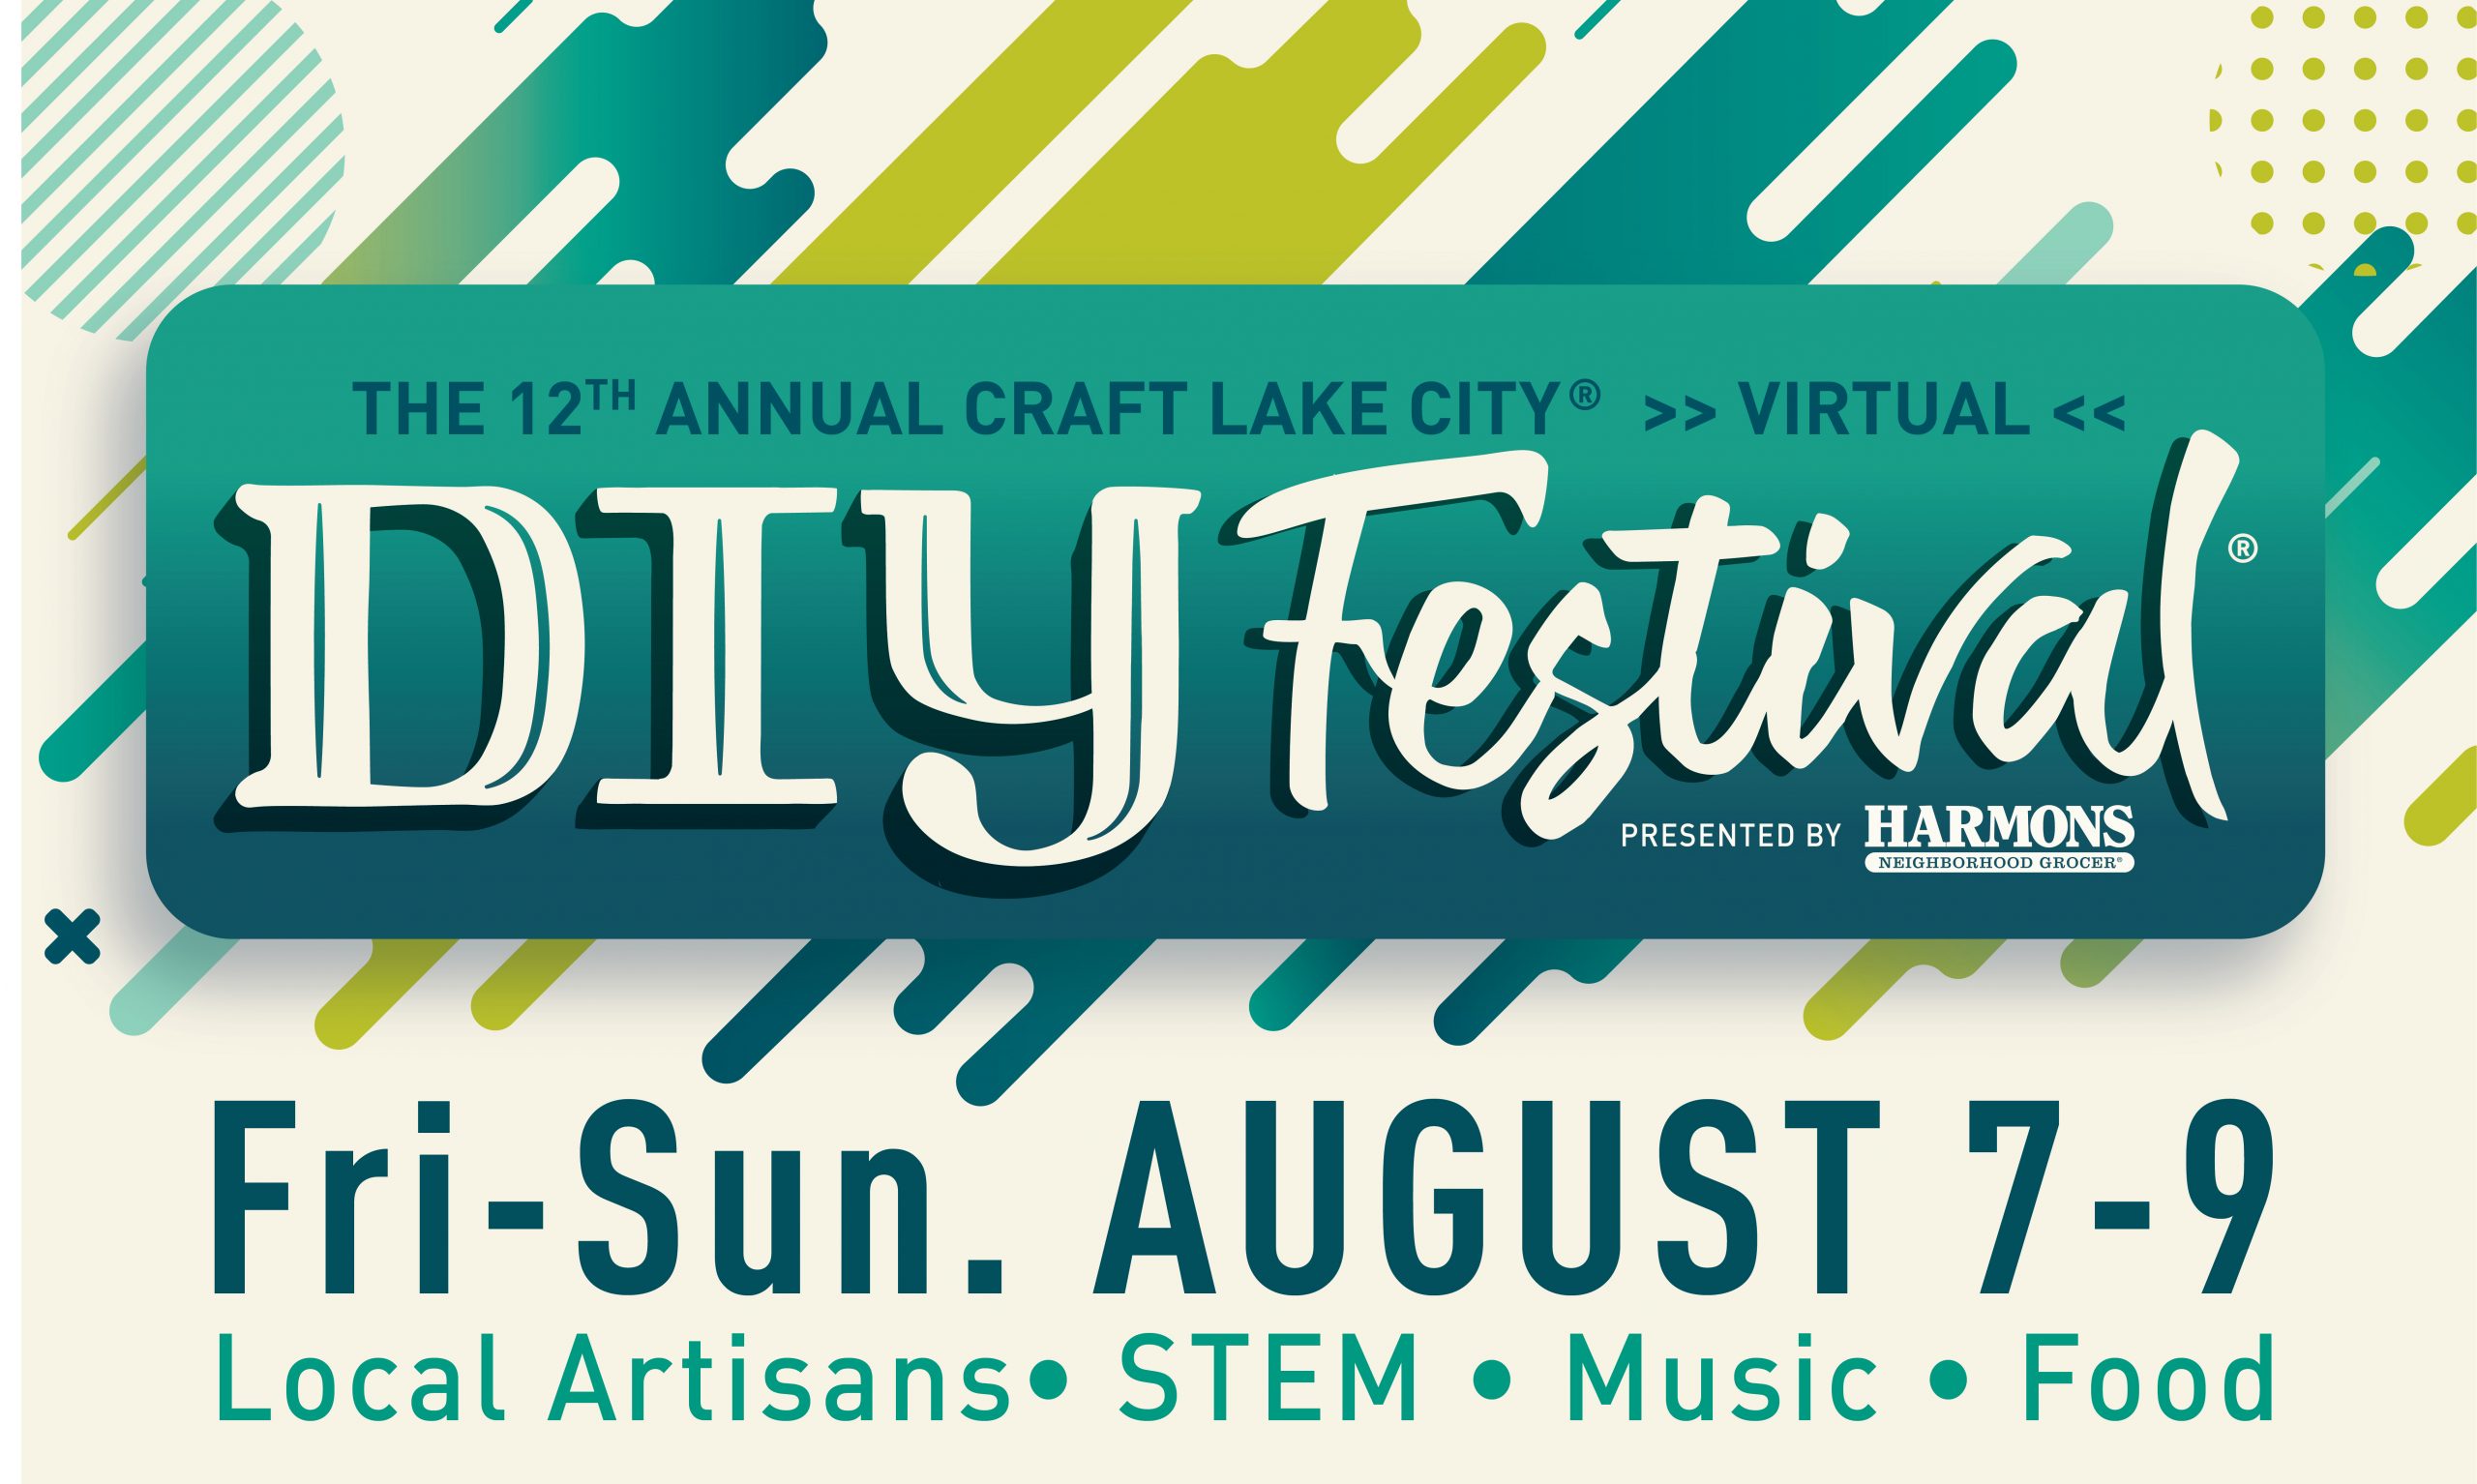 Craft Lake City Announces Accepted Exhibitors for the Virtual 12th Annual Craft Lake City® DIY Festival® Presented By Harmons